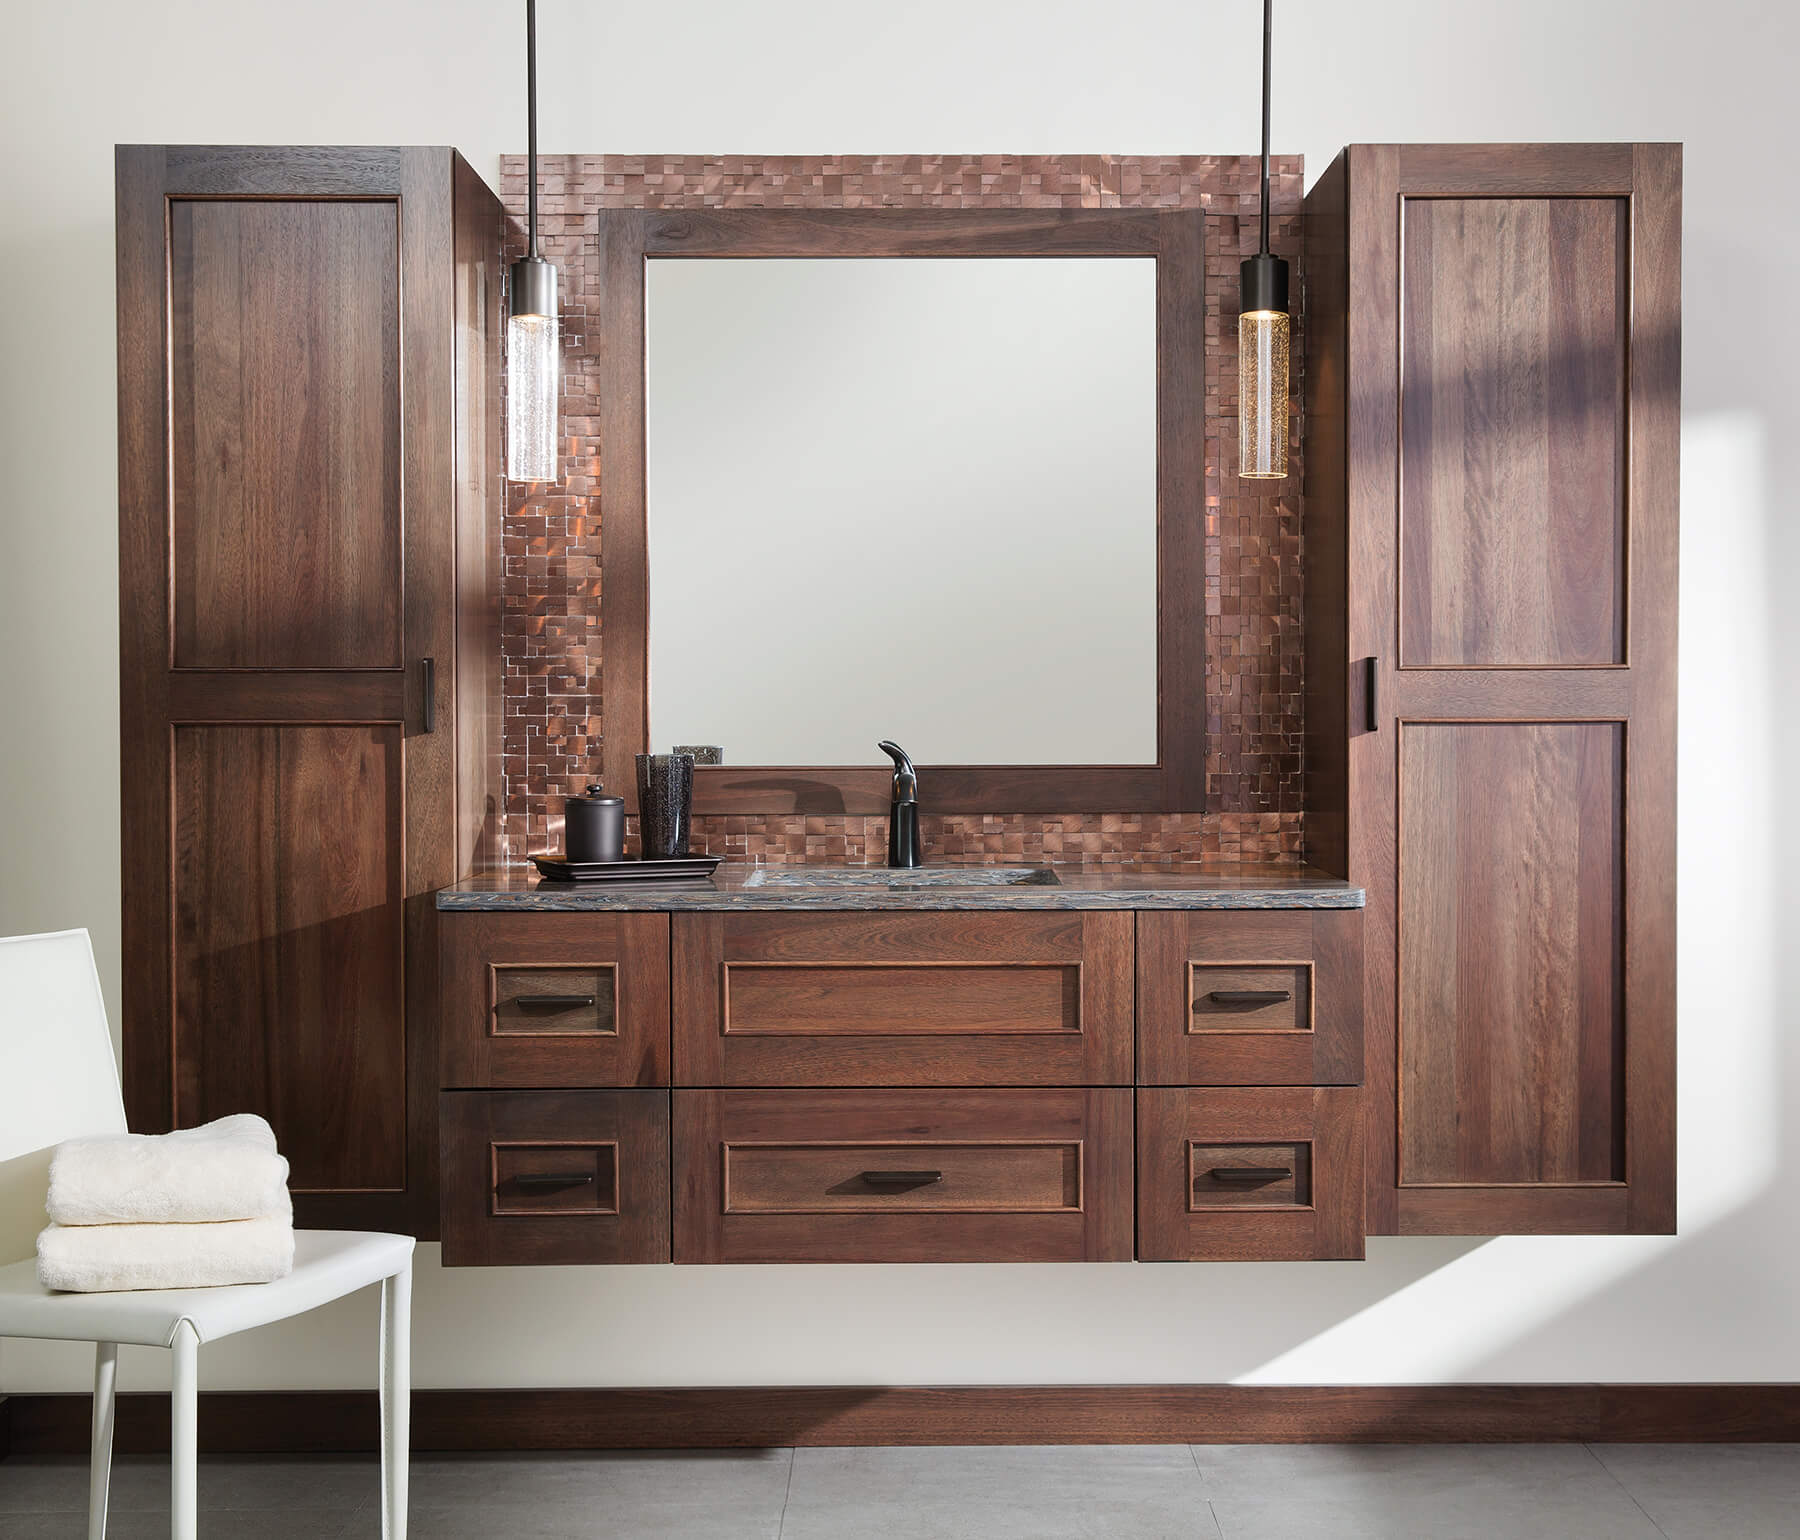 Floating vanities are a favorite look for small bathrooms to impart an open, airy and expansive feel. For this bath, rich bronze and copper finishes are combined for a stunning effect. A centered sink includes convenient drawers on both sides of the sink for powder room storage, while two wall-hung linen cabinets frame the vanity to create a sleek, symmetric design.